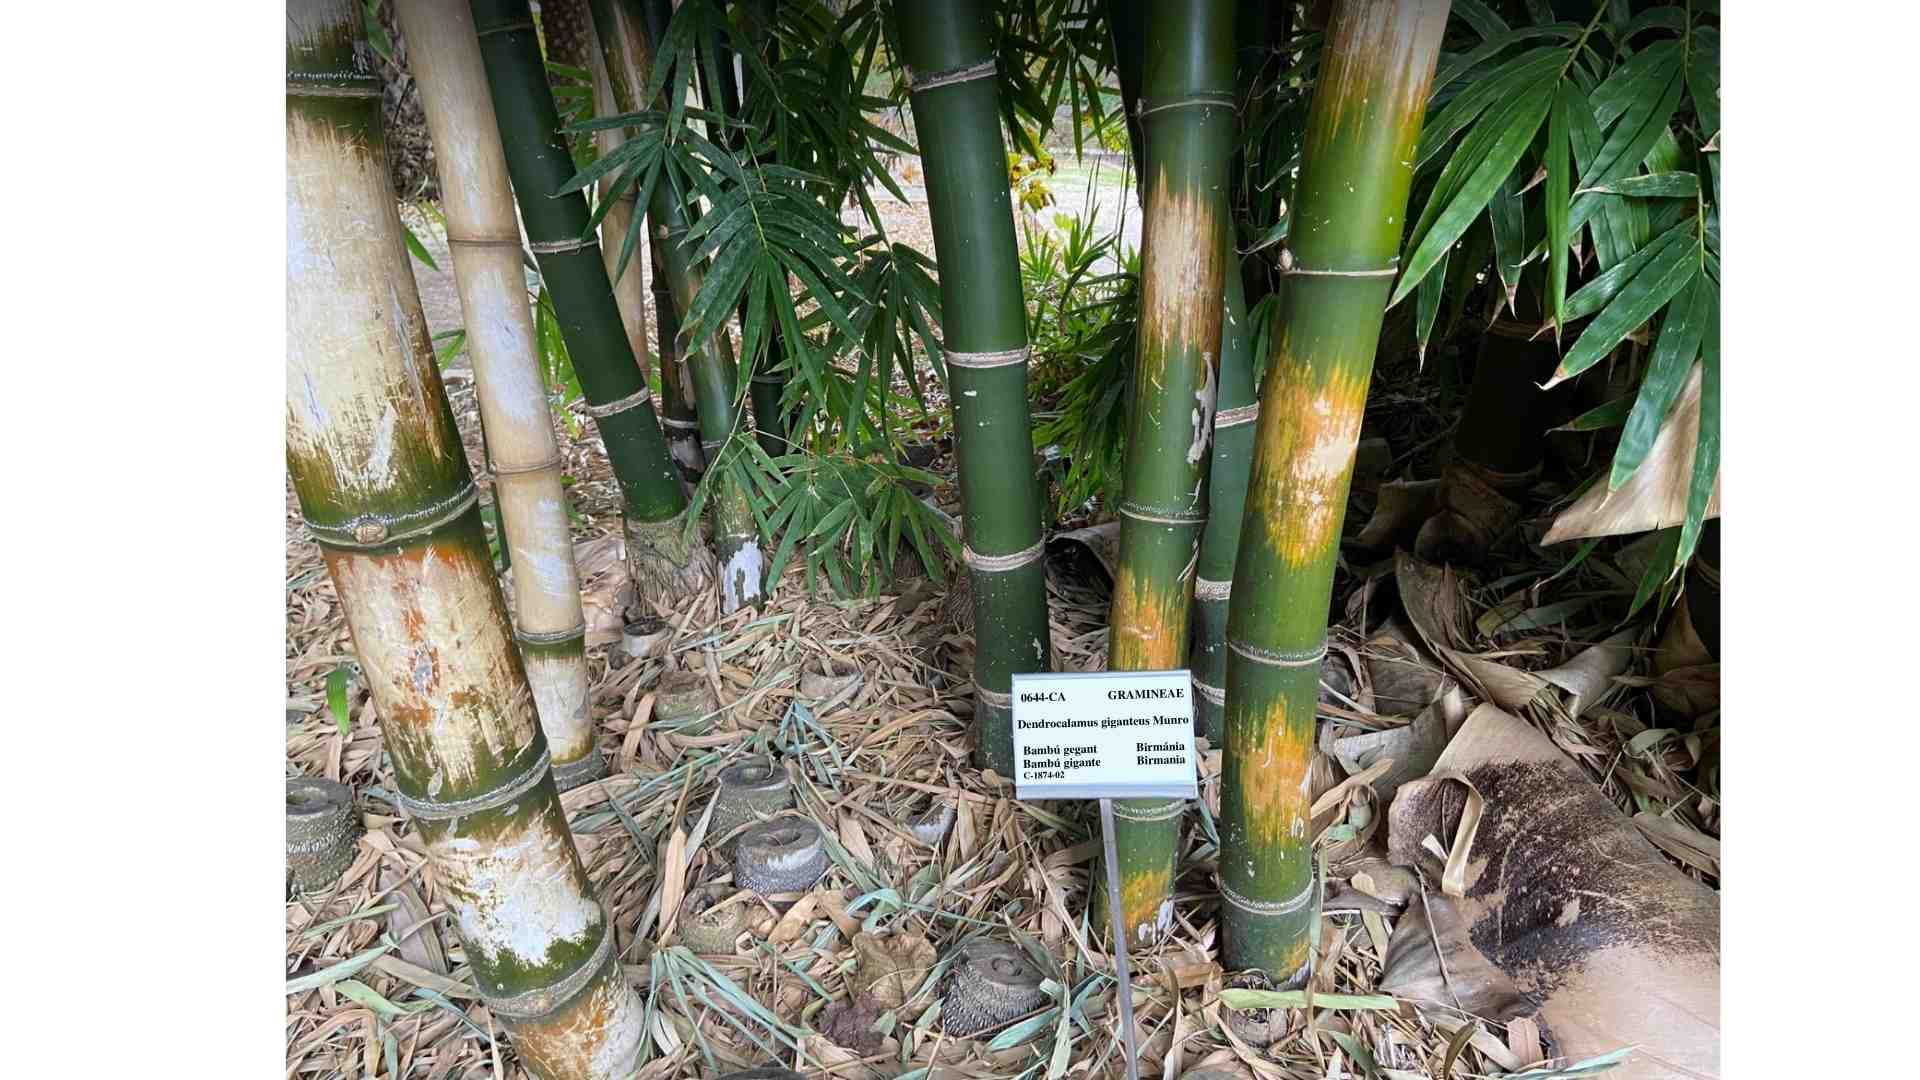 Giant bamboo in Spain